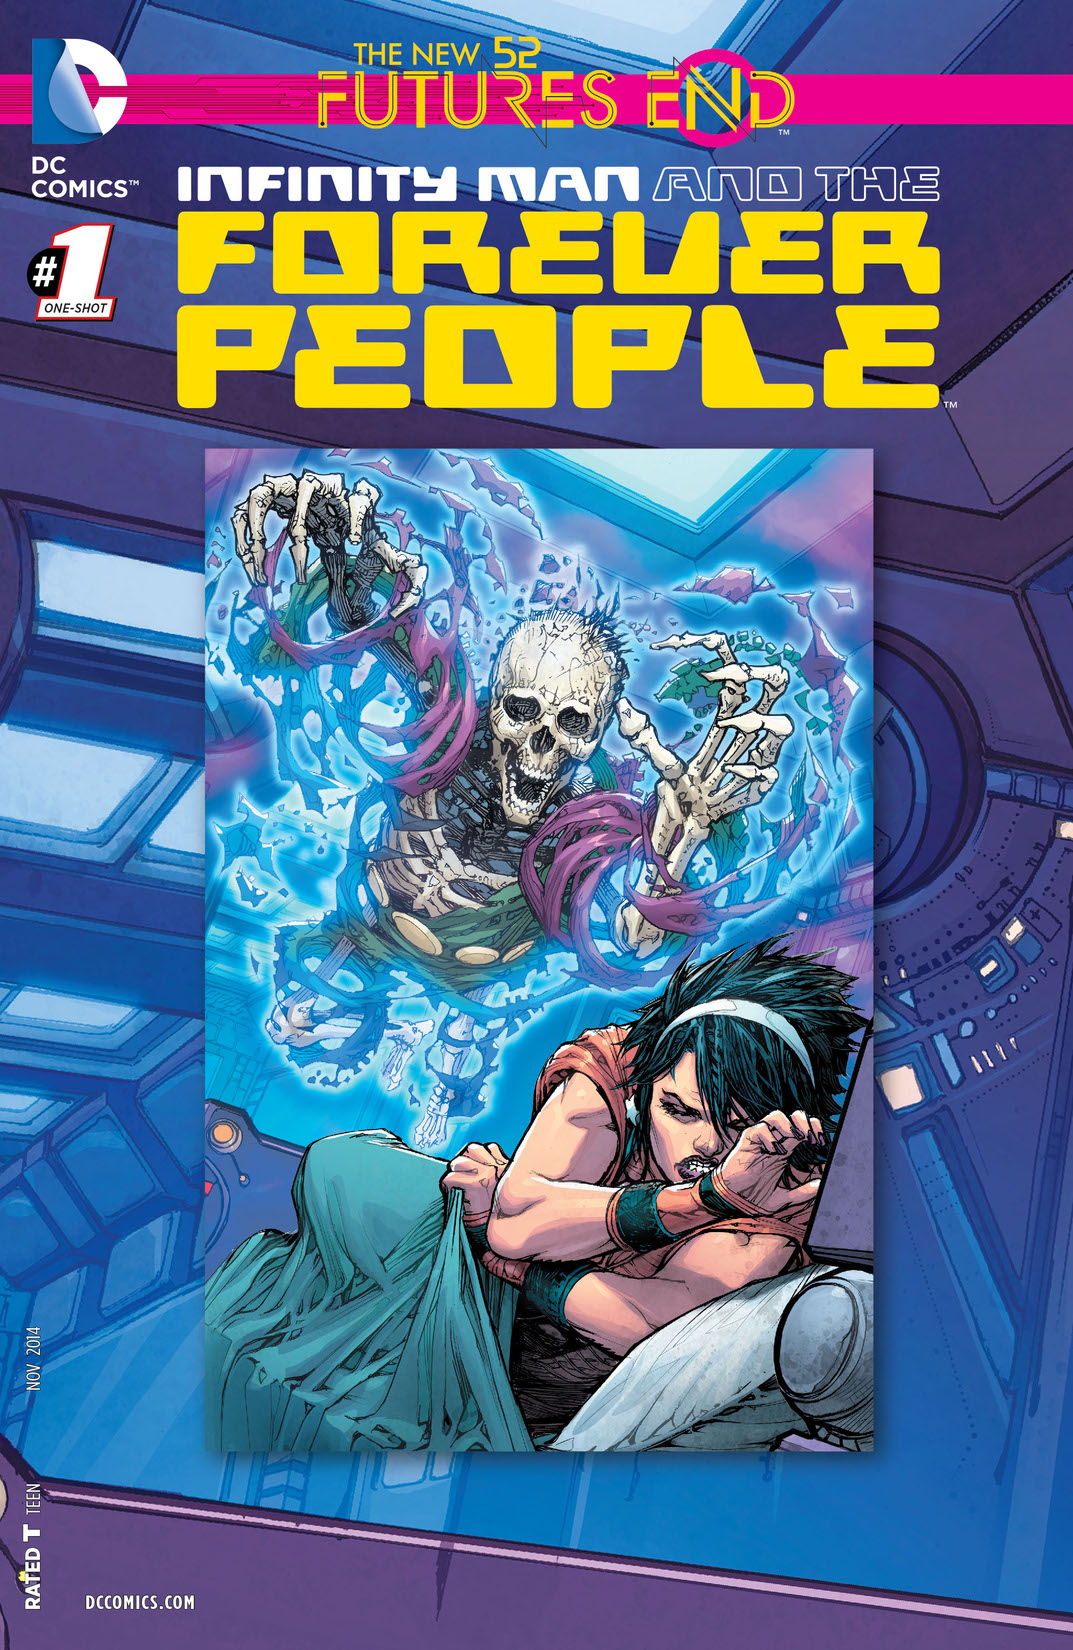 Infinity Man and the Forever People: Futures End #1 preview images